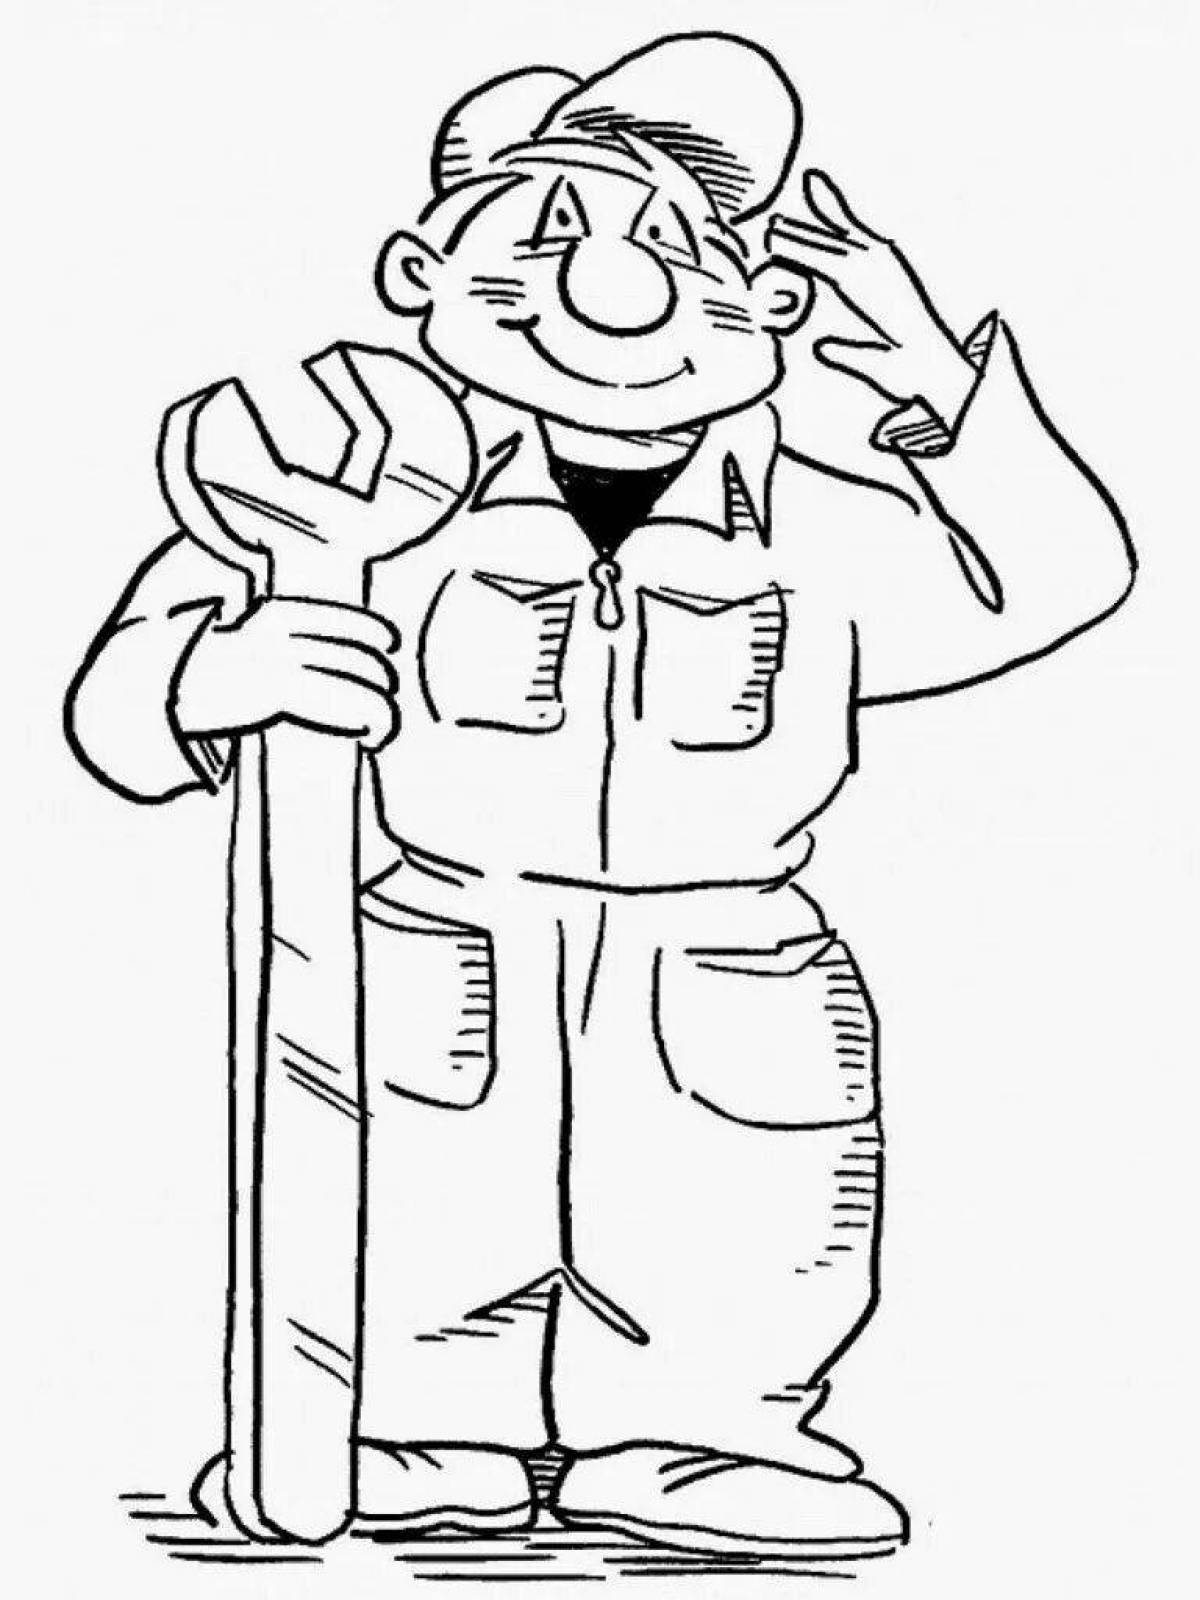 Charming mechanic coloring page